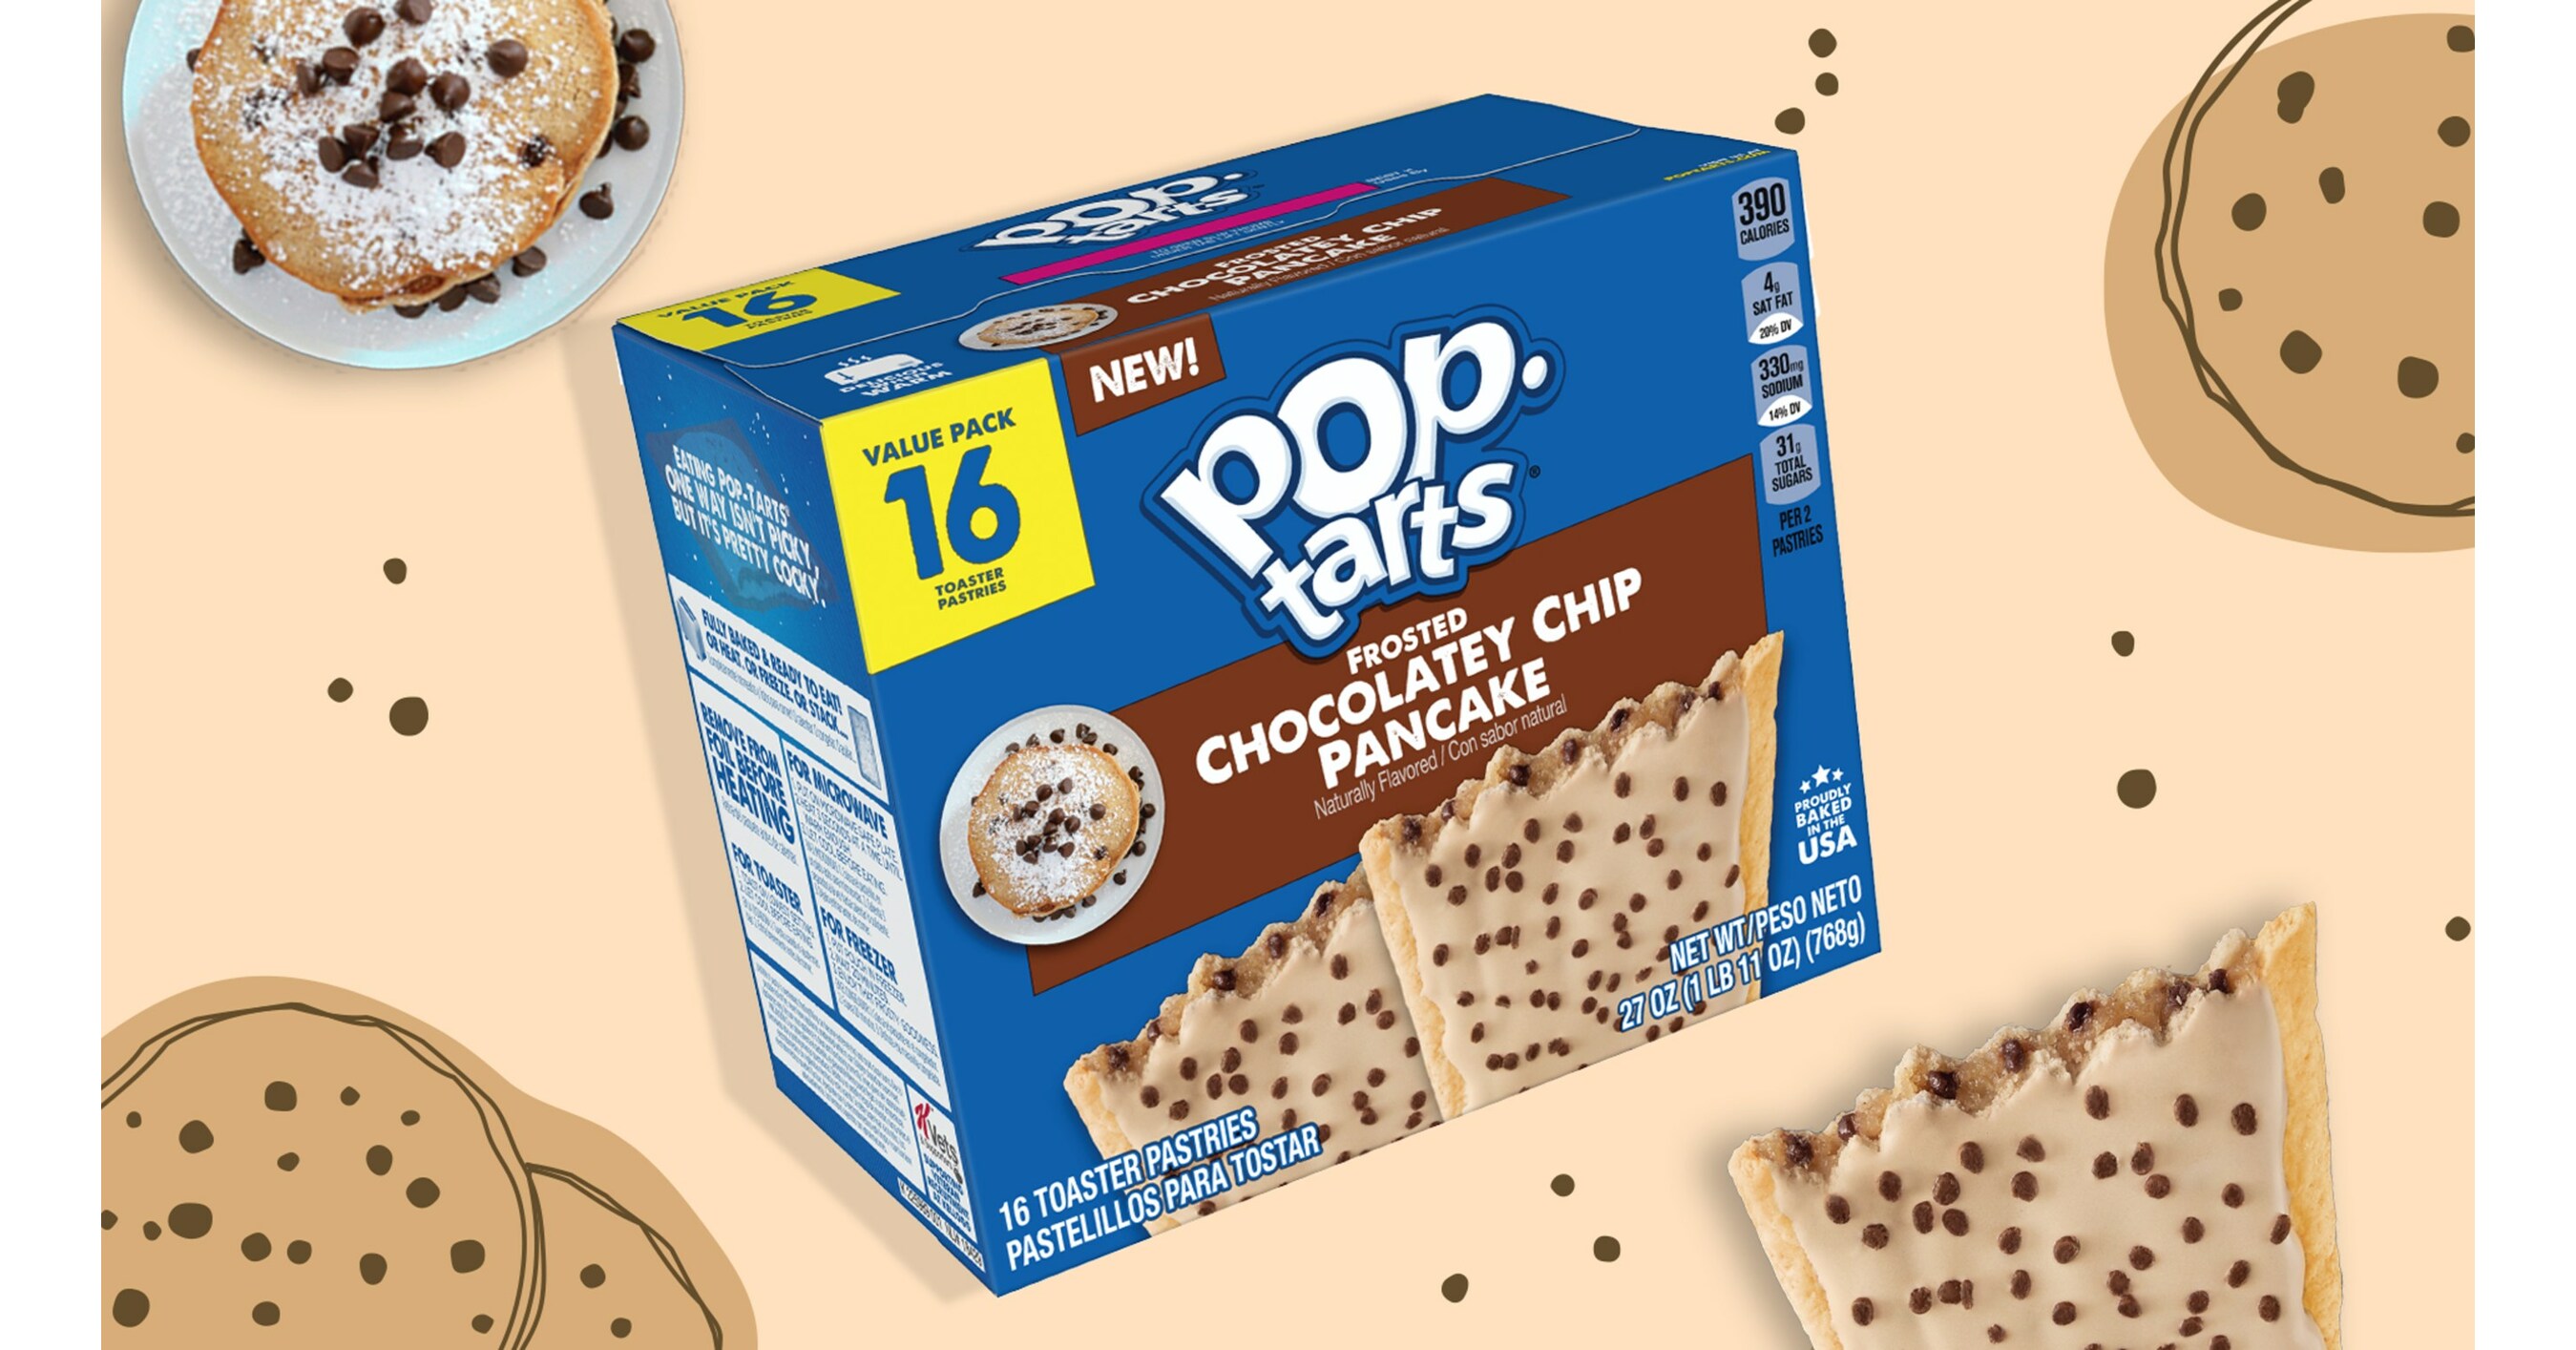 Pop Tarts Frosted Chocotastic